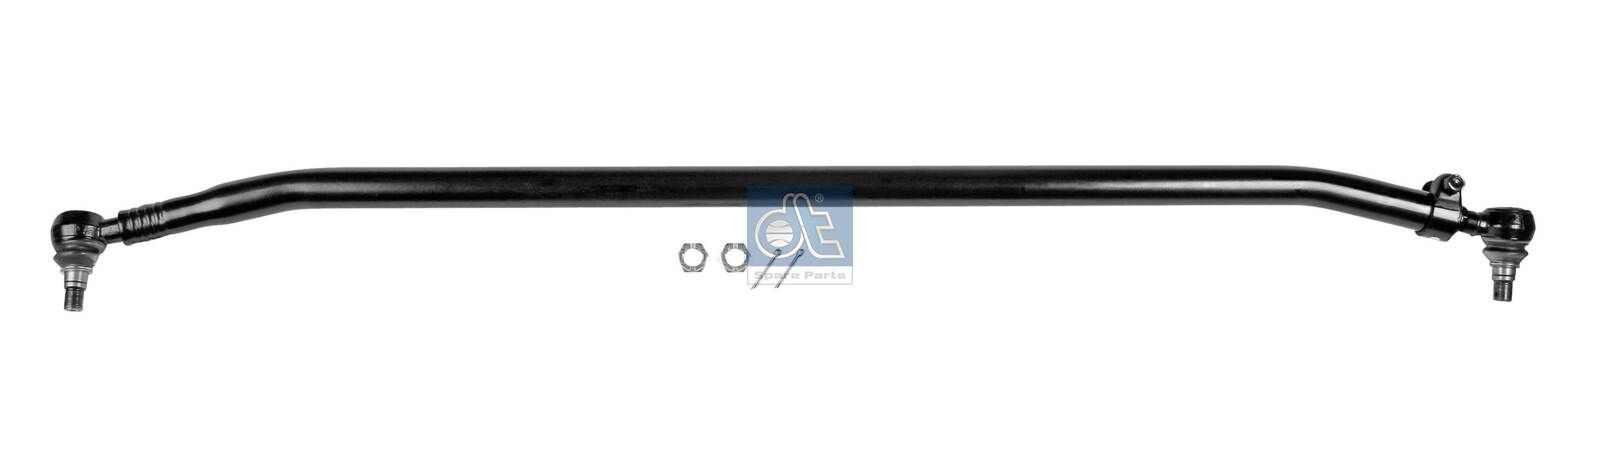 DT Spare Parts 1.19256 Rod Assembly 1527989